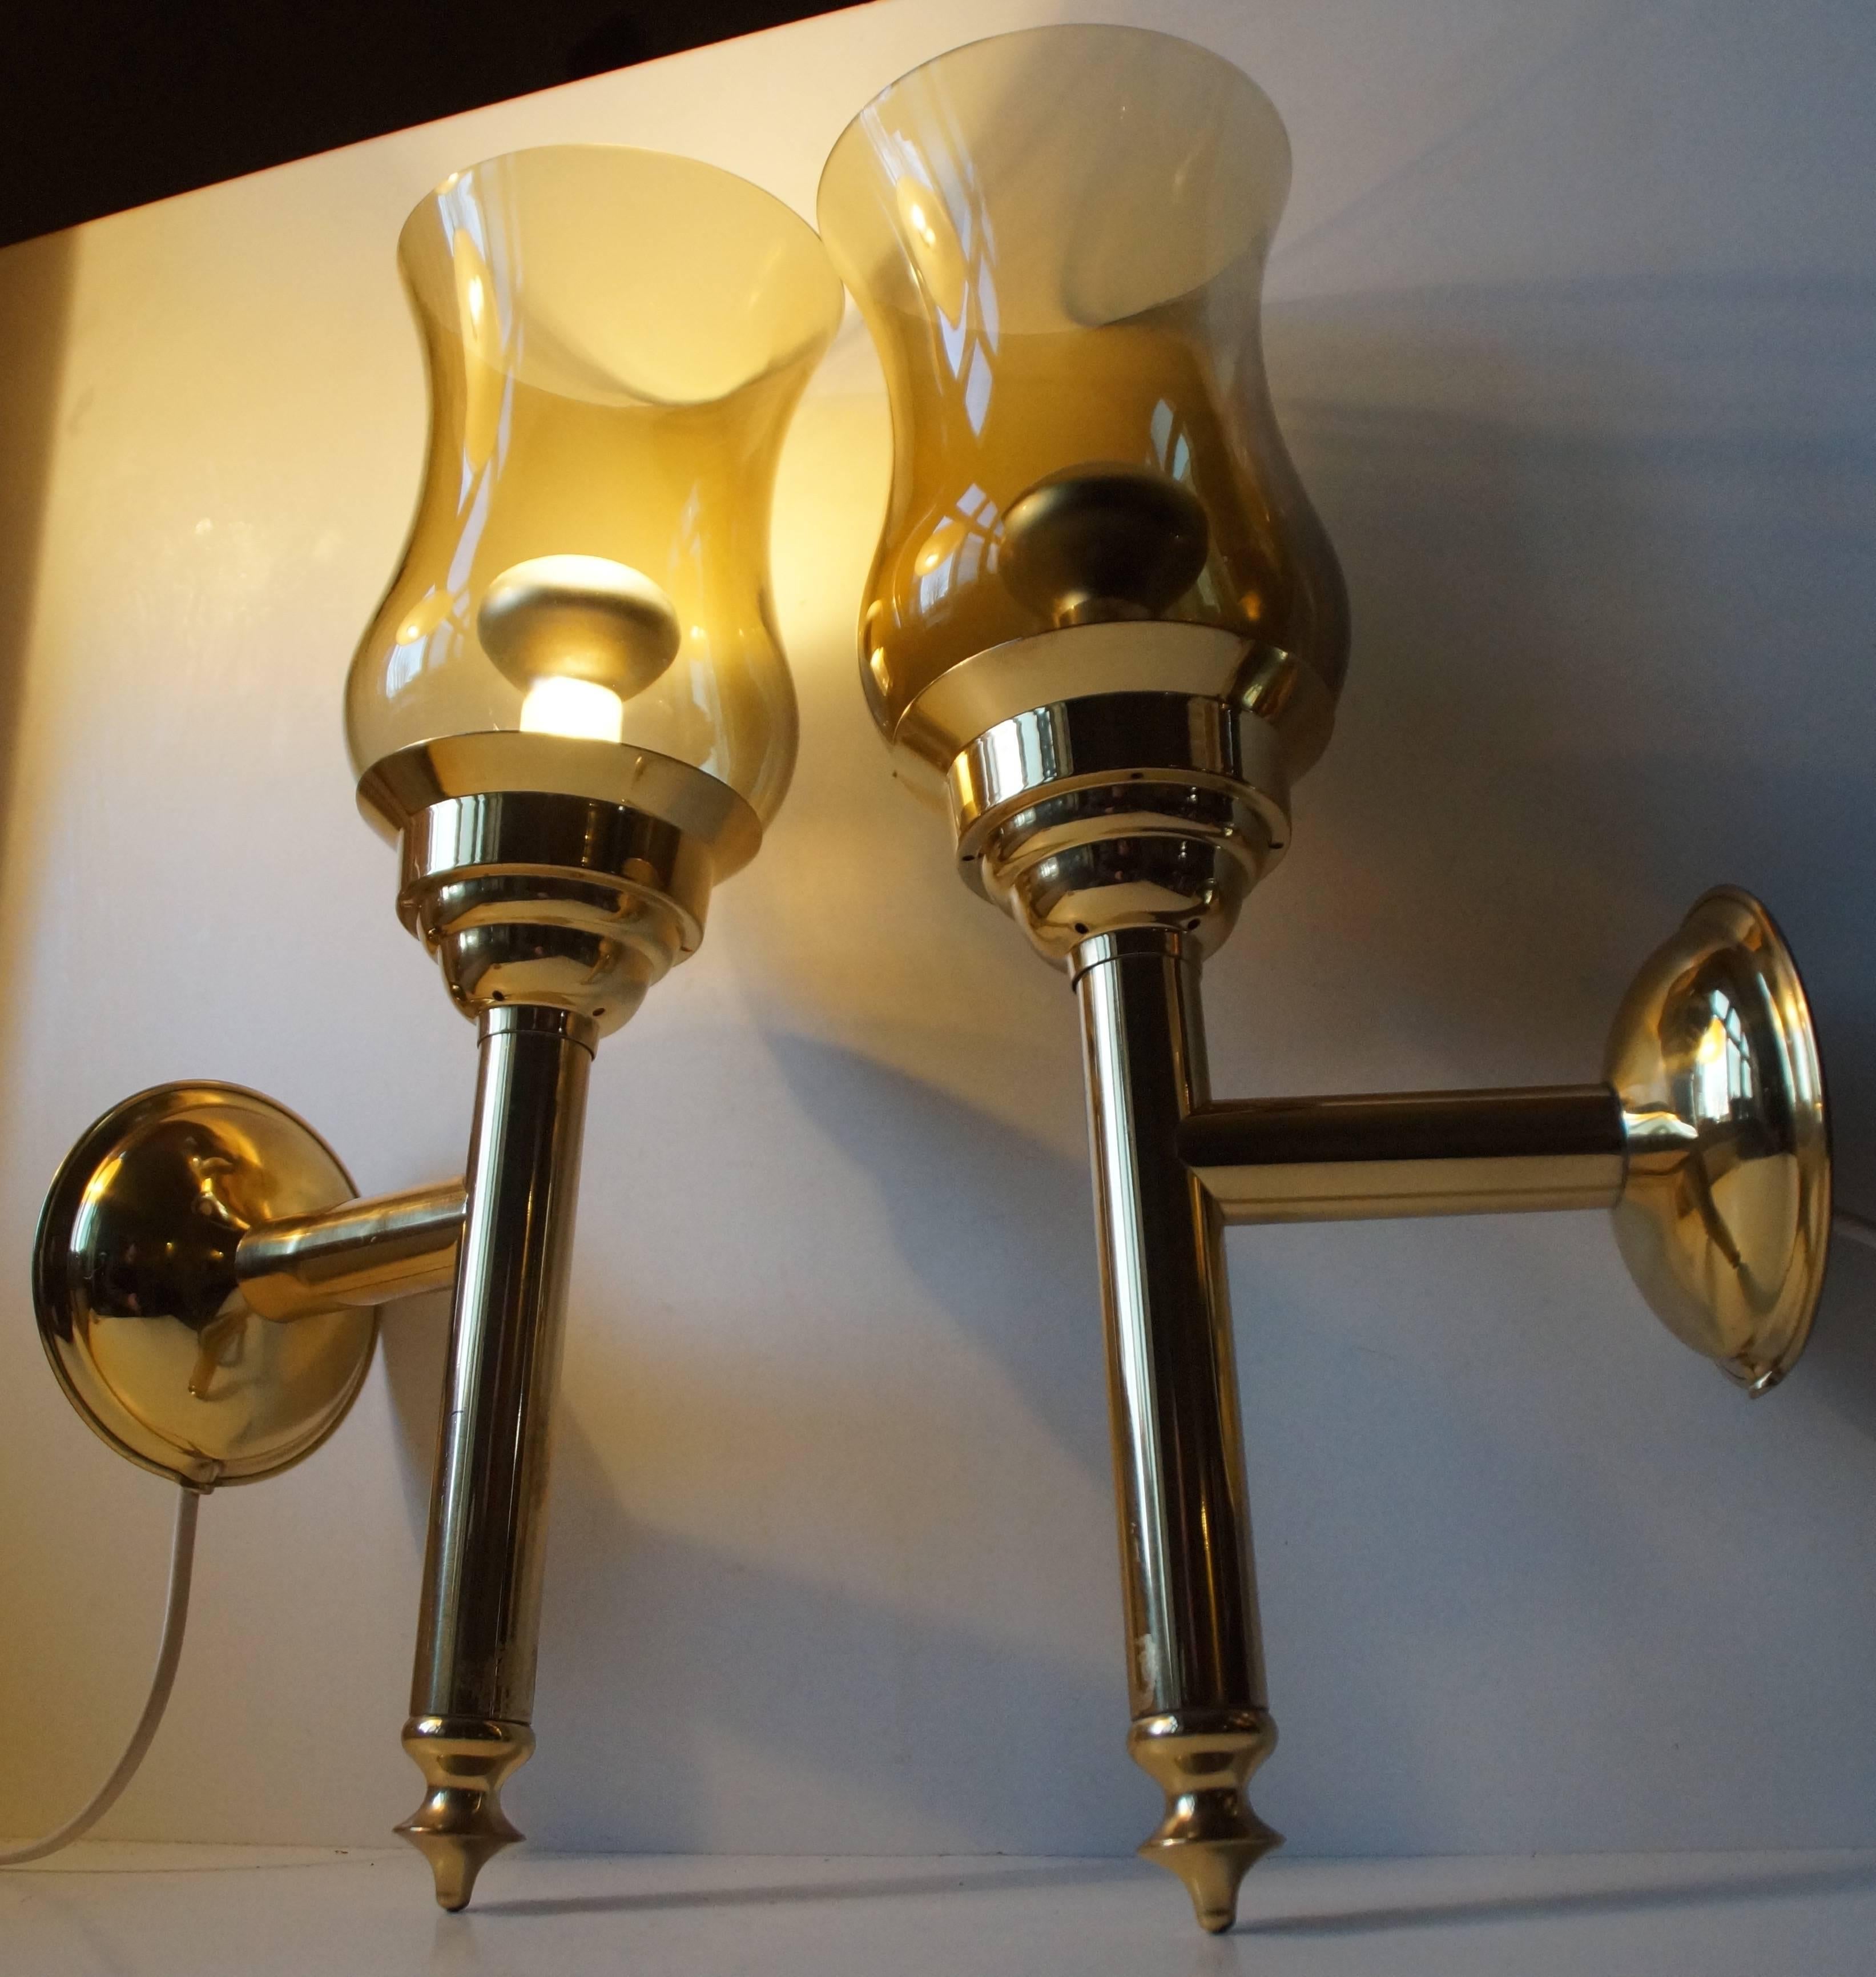 A pair of tall Danish torch-shaped wall lights made of polished brass and single layer smoke glass. Both marked with 'Danish Design' Sticker to the back of the mount. Measurements: Height 16 inches (41 cm), Depth 7 inch (18 cm). The price is for the